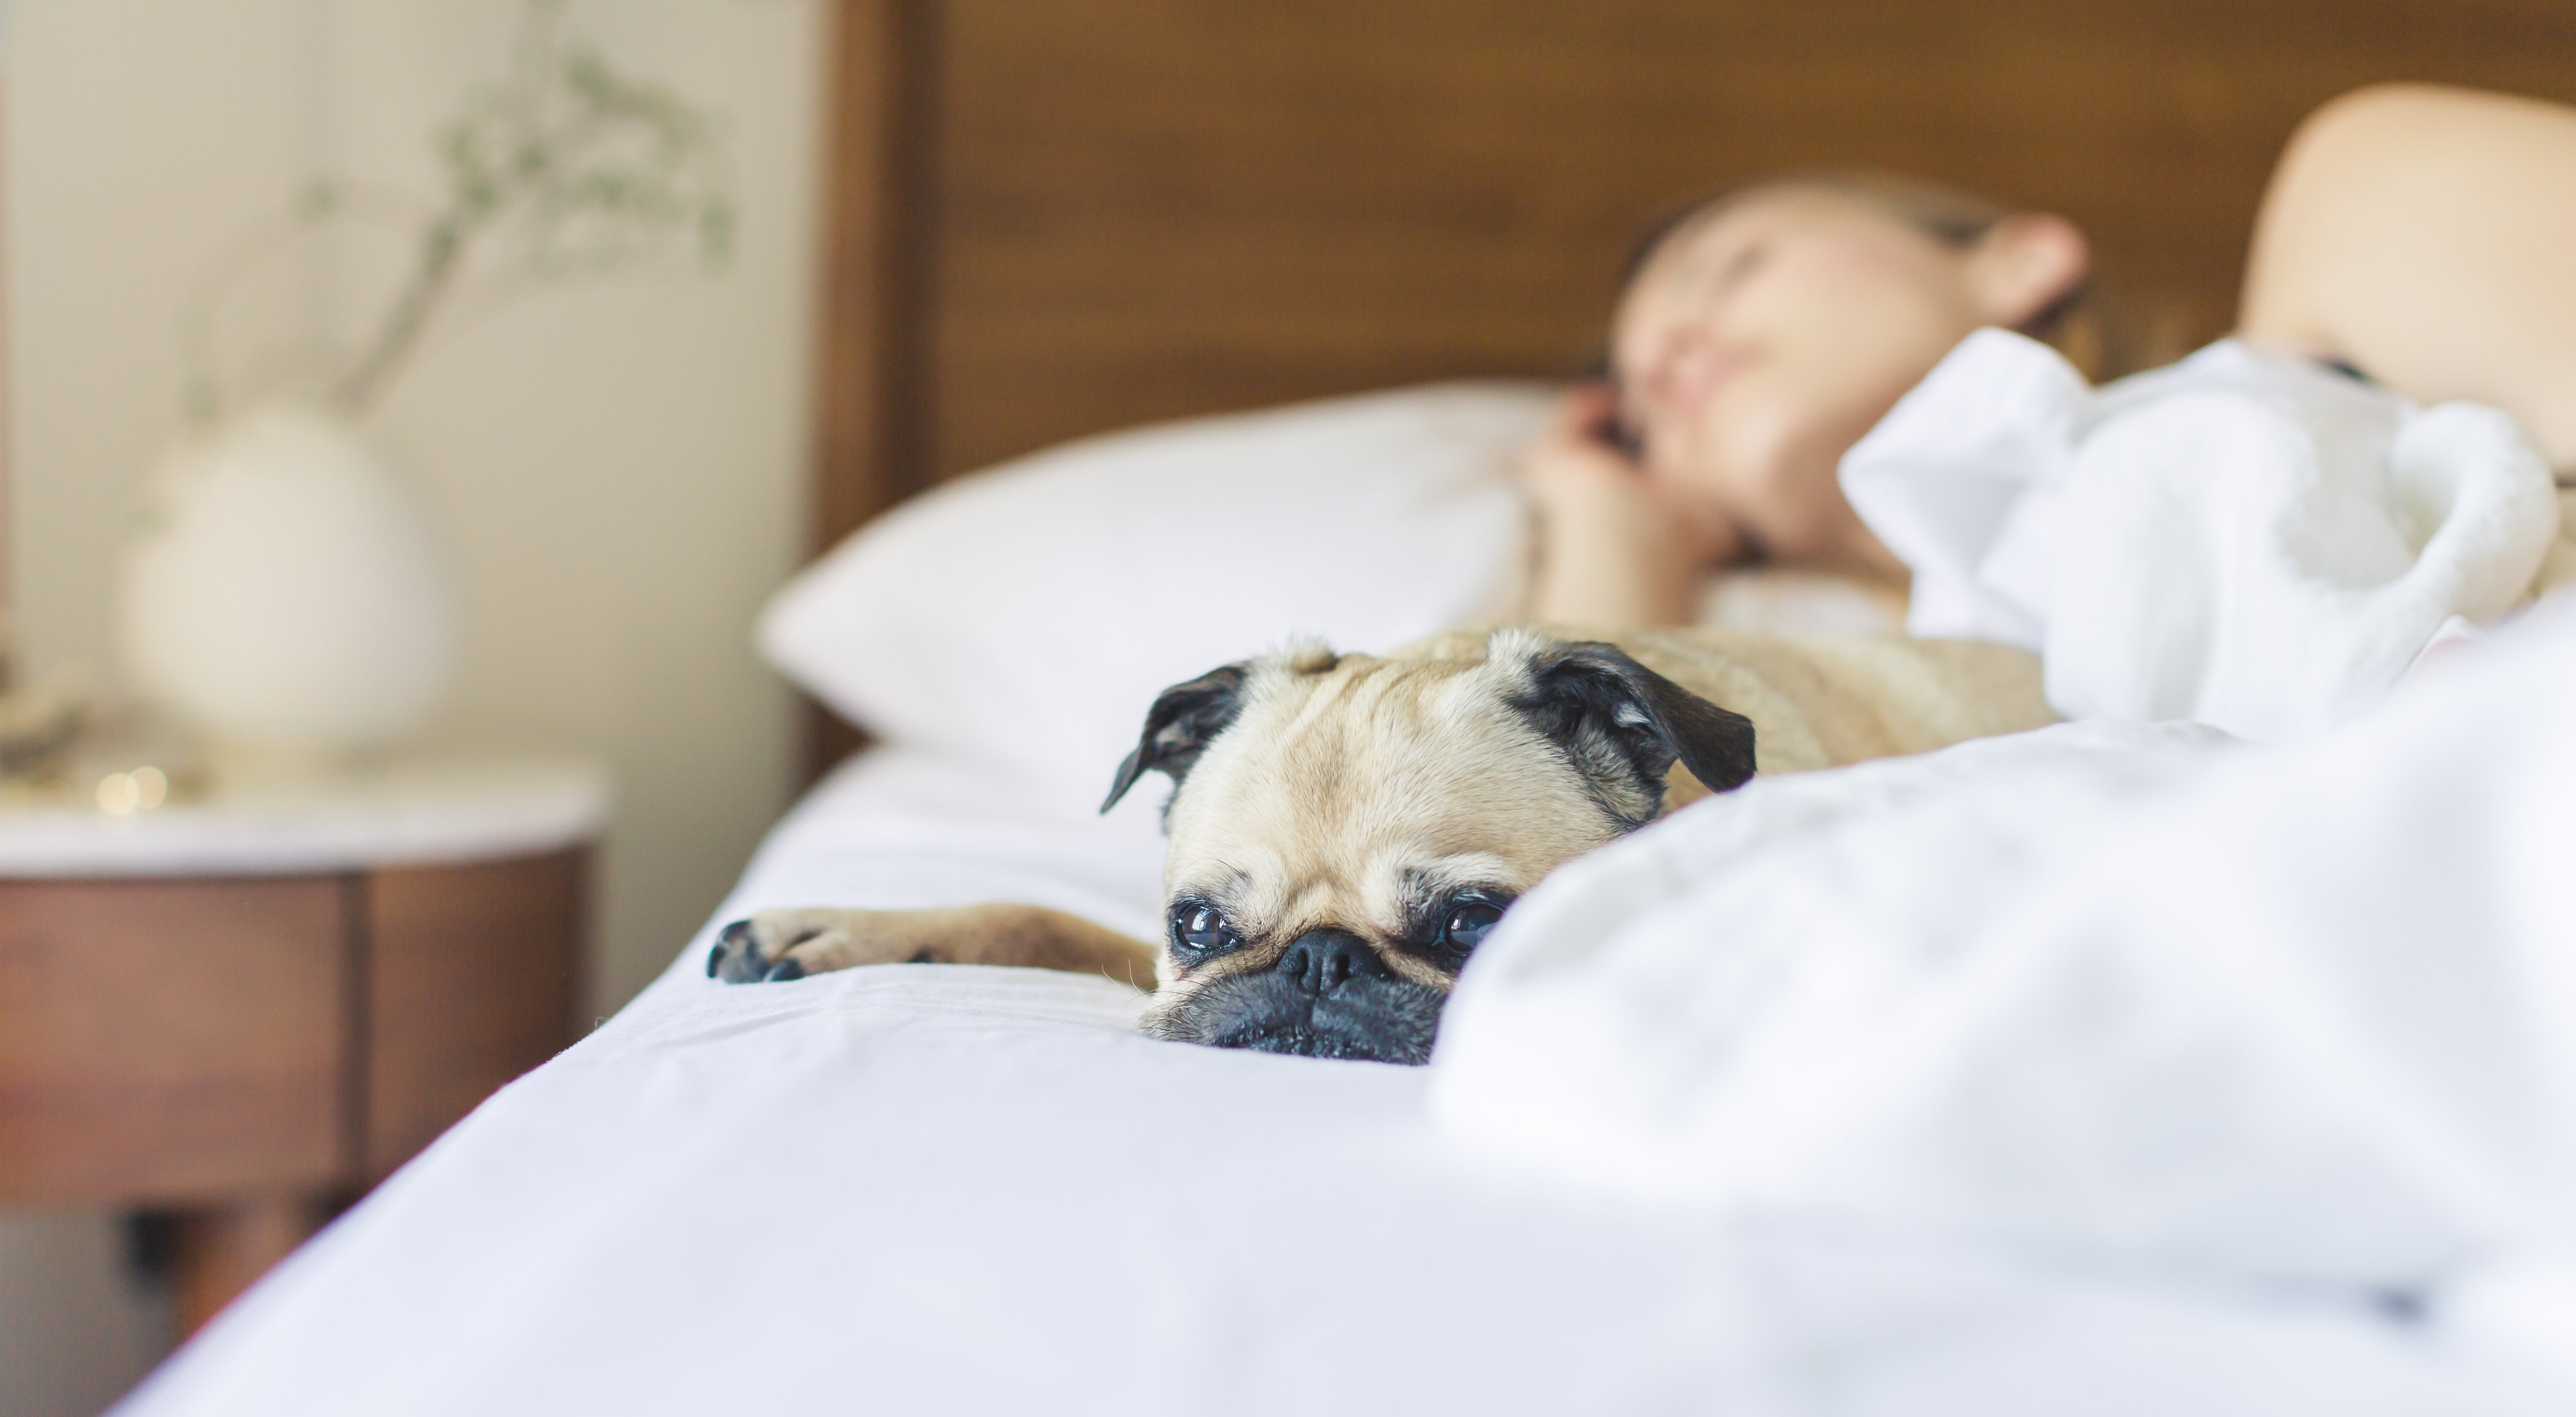 pug and person sleeping on a bed